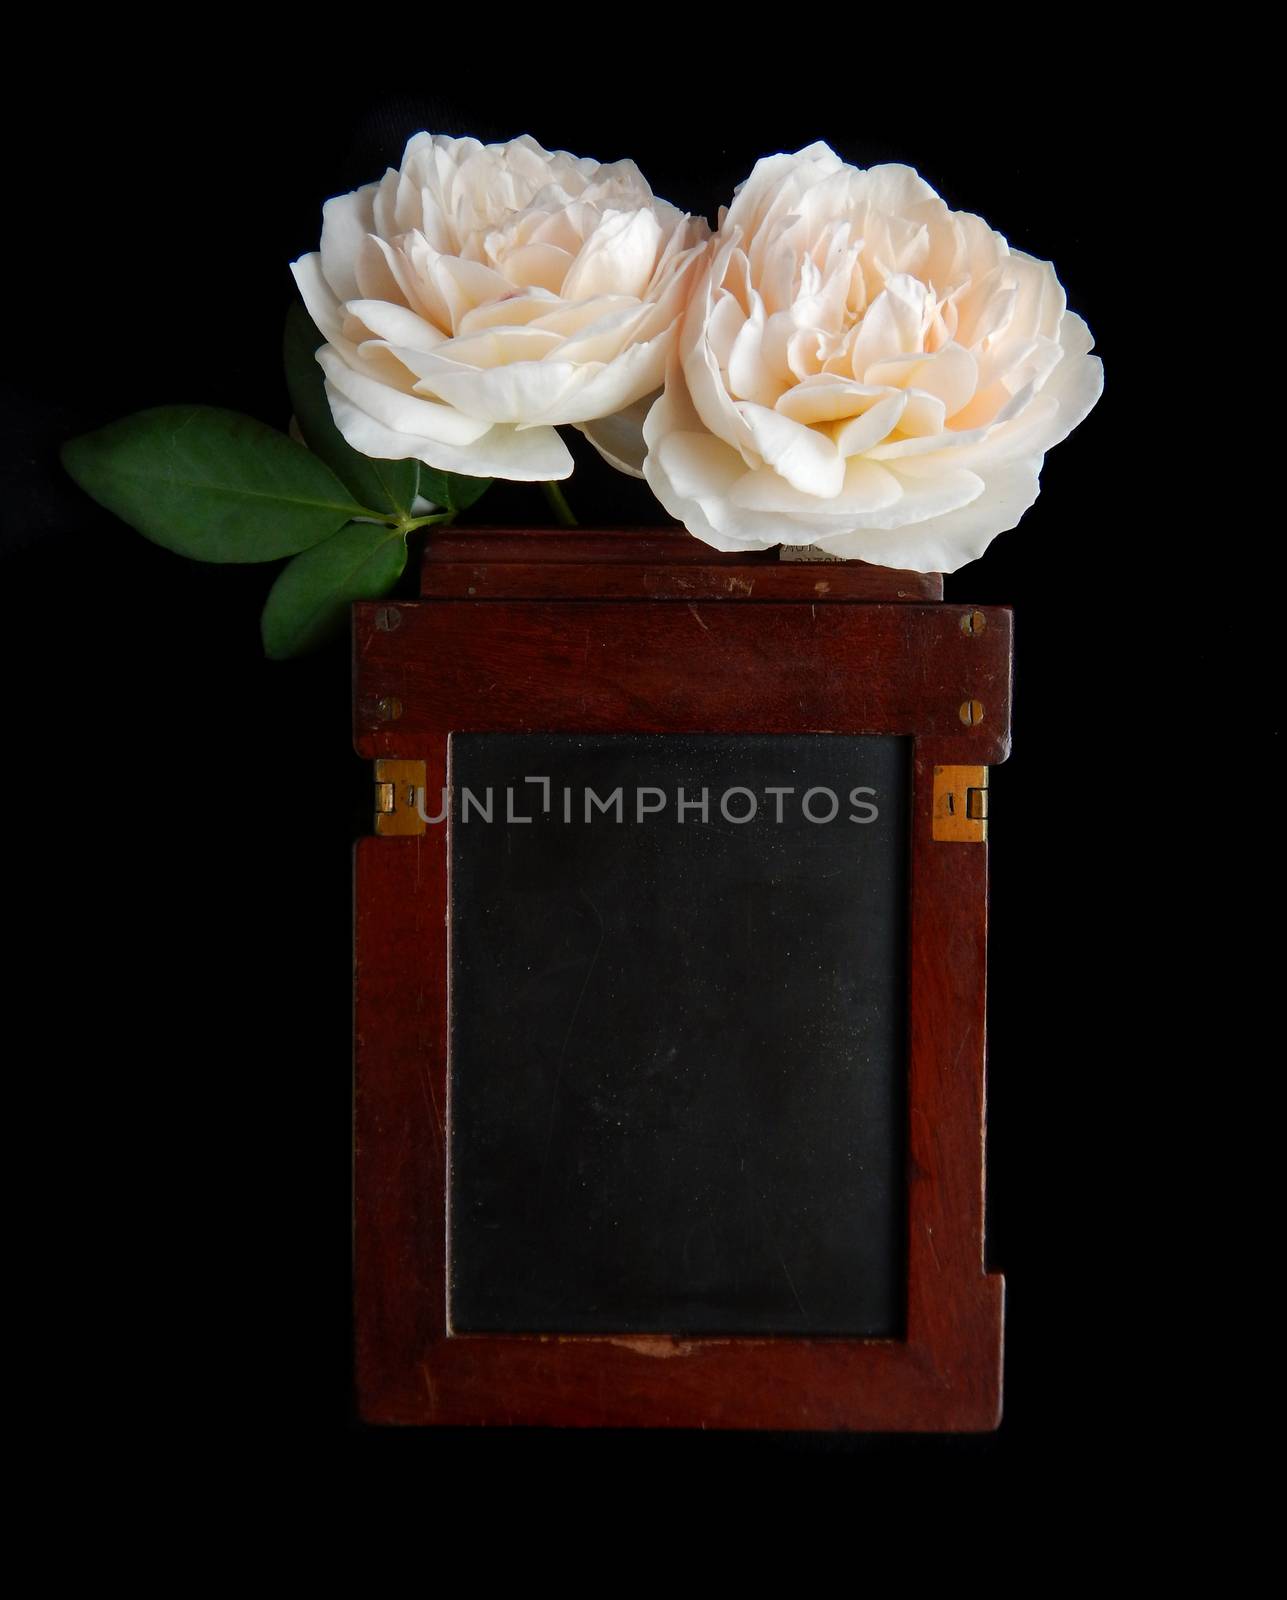 Vintage rose and blank photo frame by ohhlanla